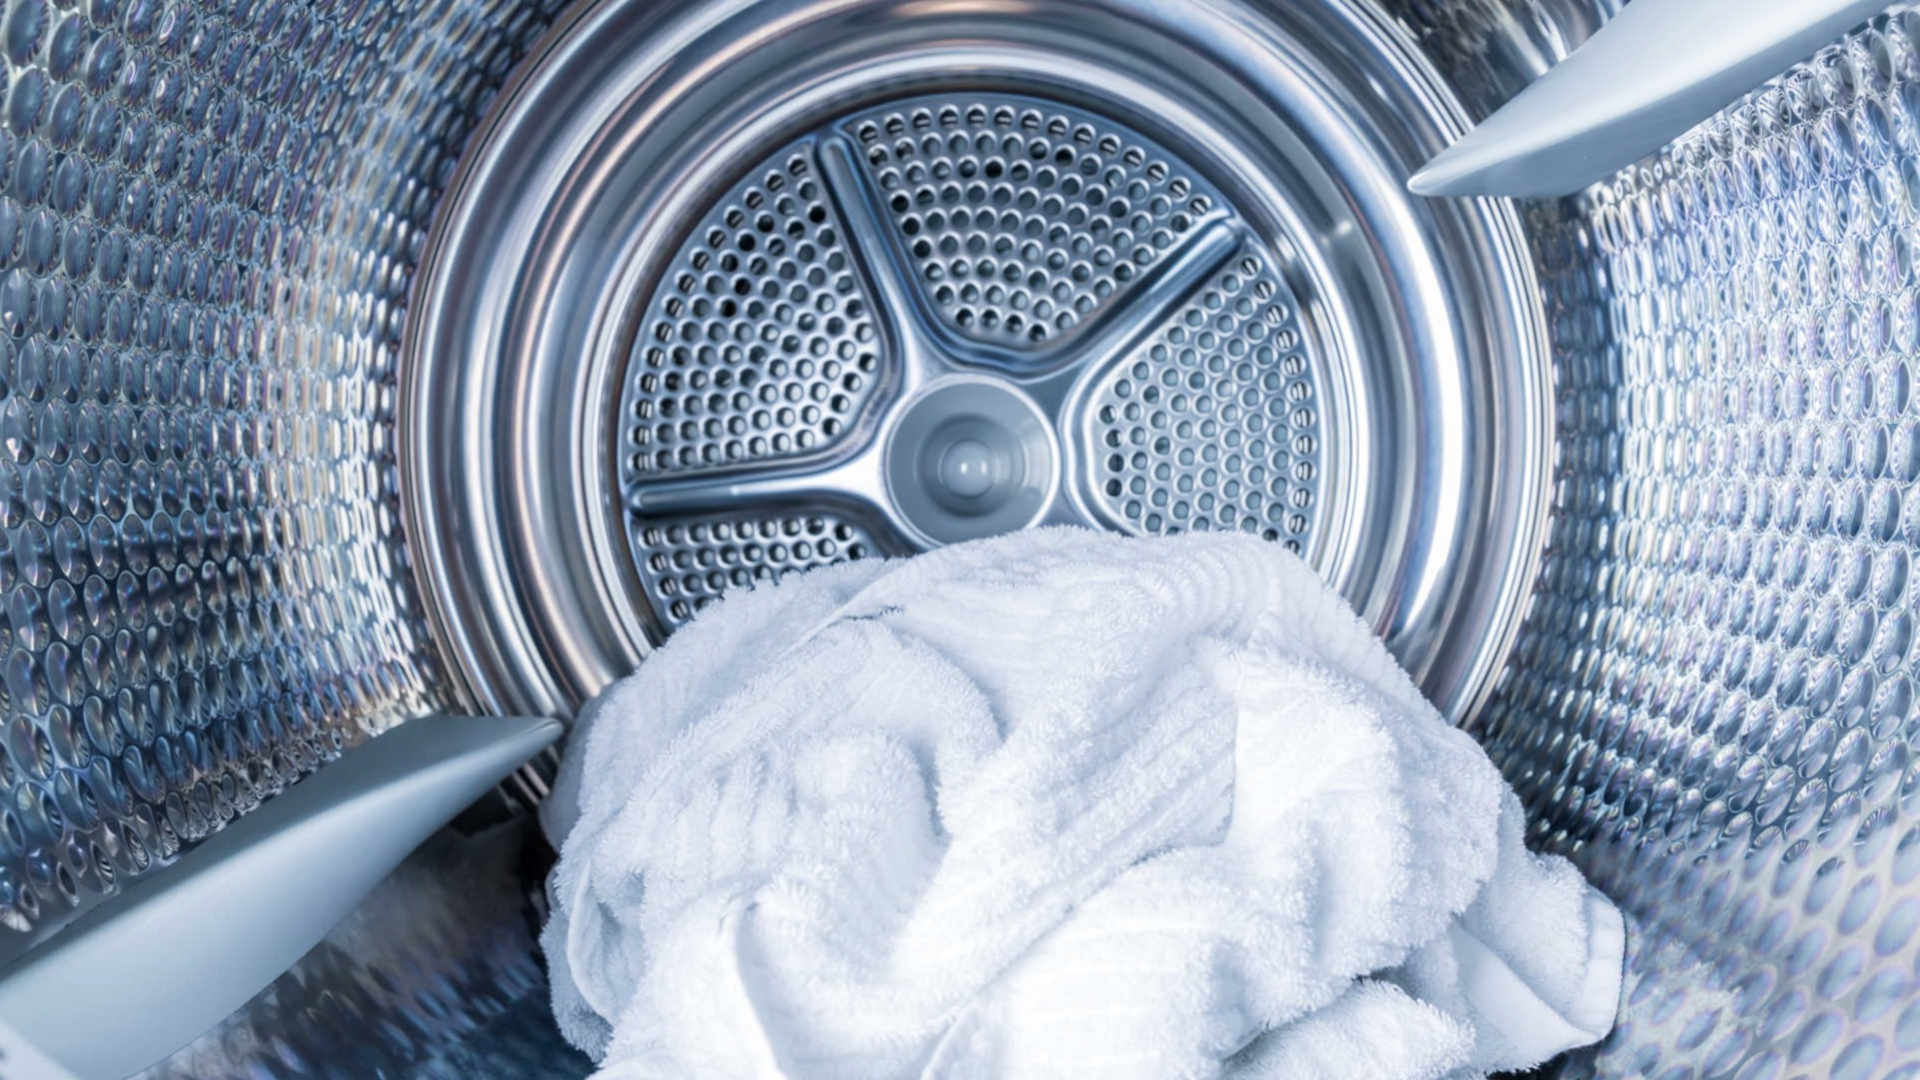 Debunking Five Common Dryer Myths